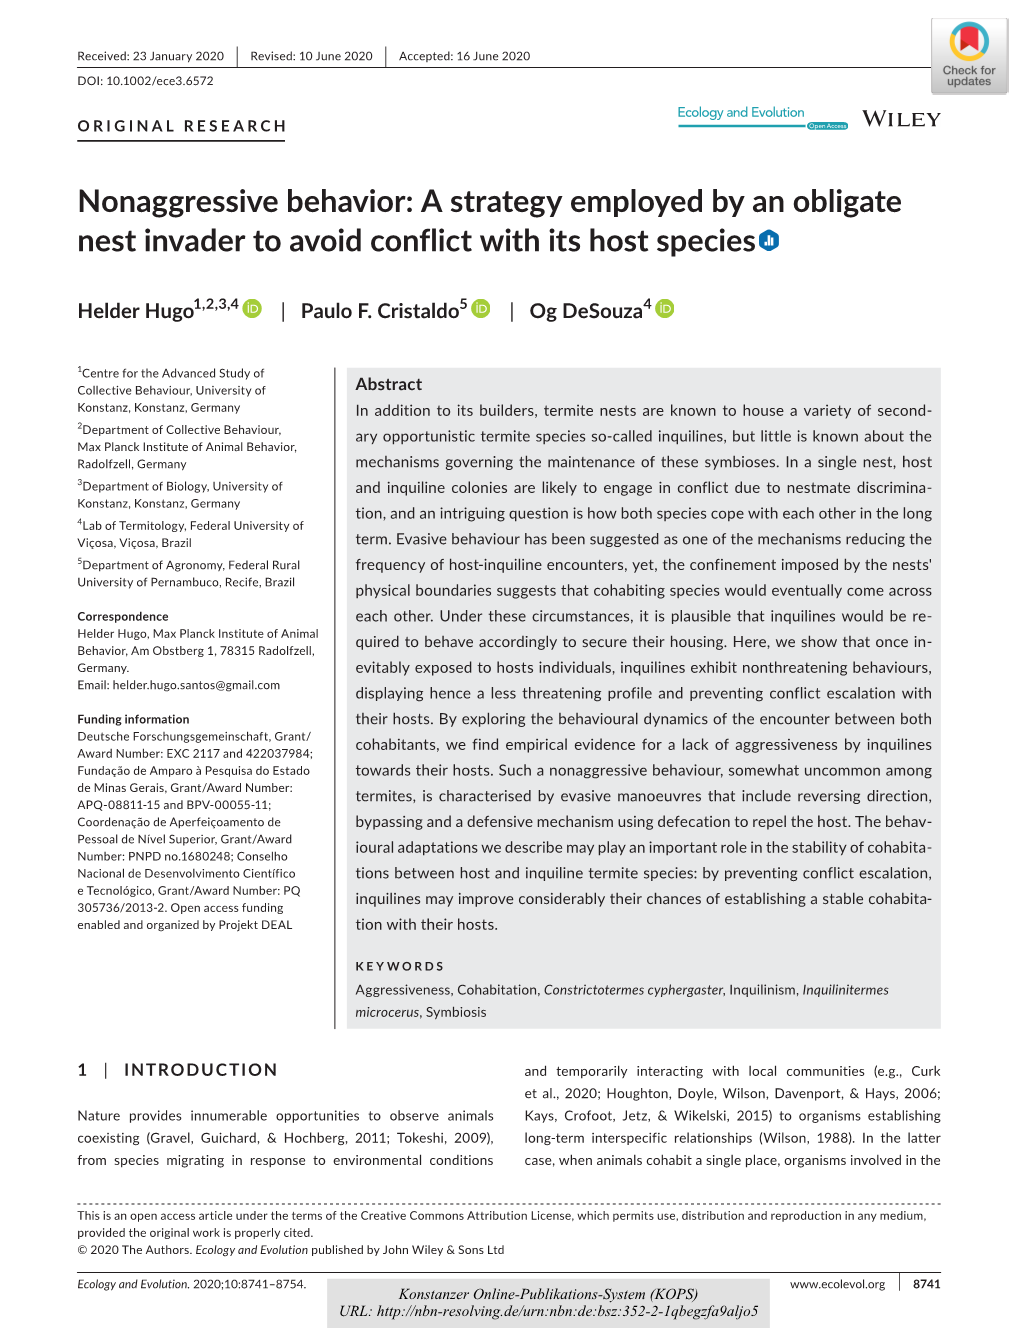 Nonaggressive Behavior: a Strategy Employed by an Obligate Nest Invader to Avoid Conflict with Its Host Species